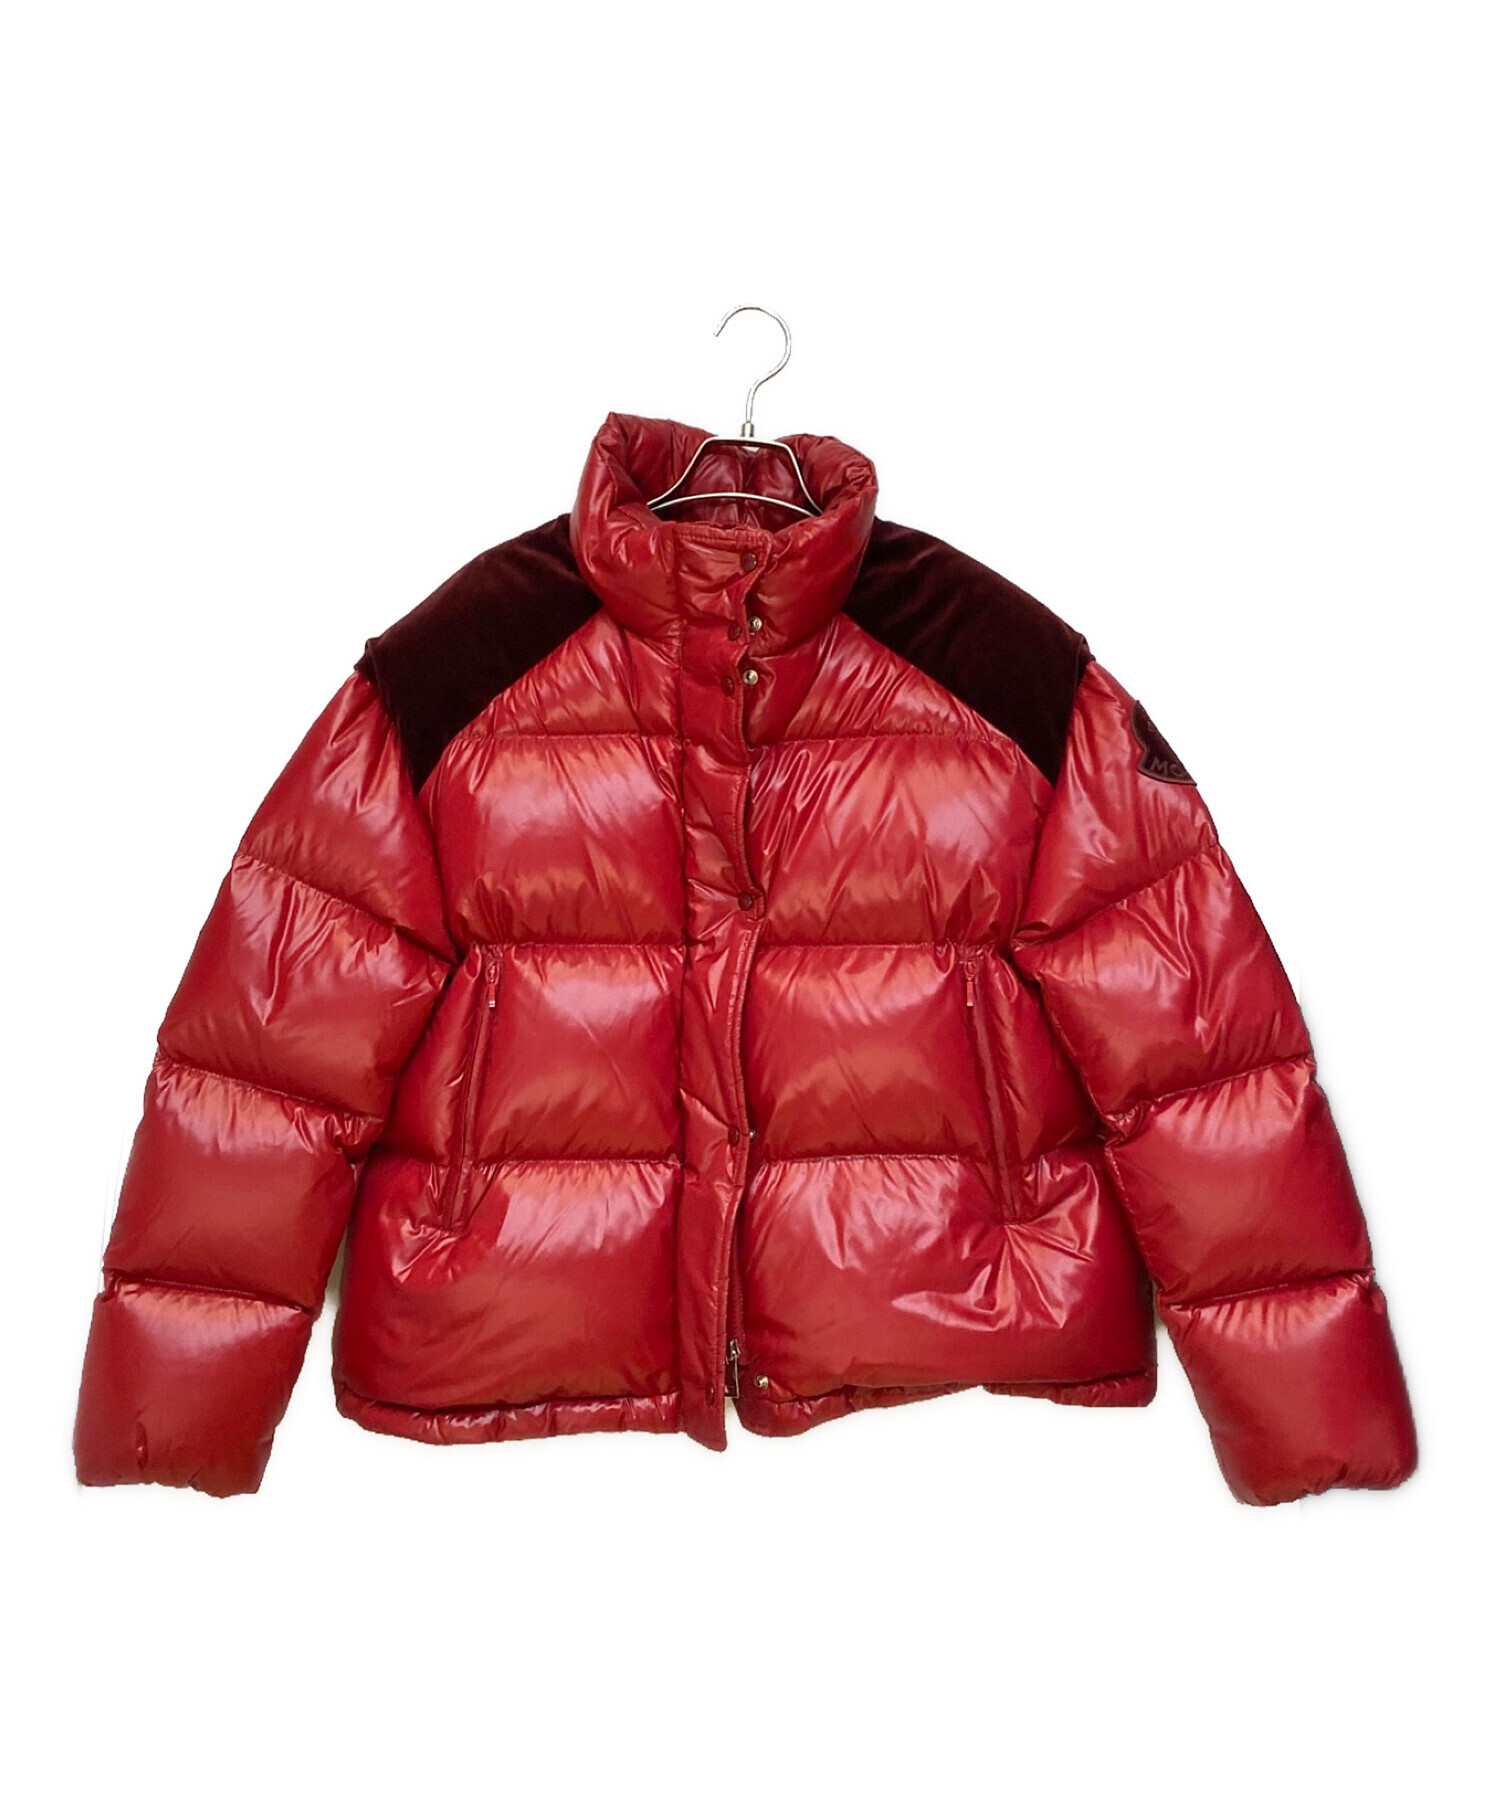 MONCLER (モンクレール) ‘CHOUETTE’ QUILTED DOWN JACKET(シュエットダウンジャケット) レッド サイズ:3